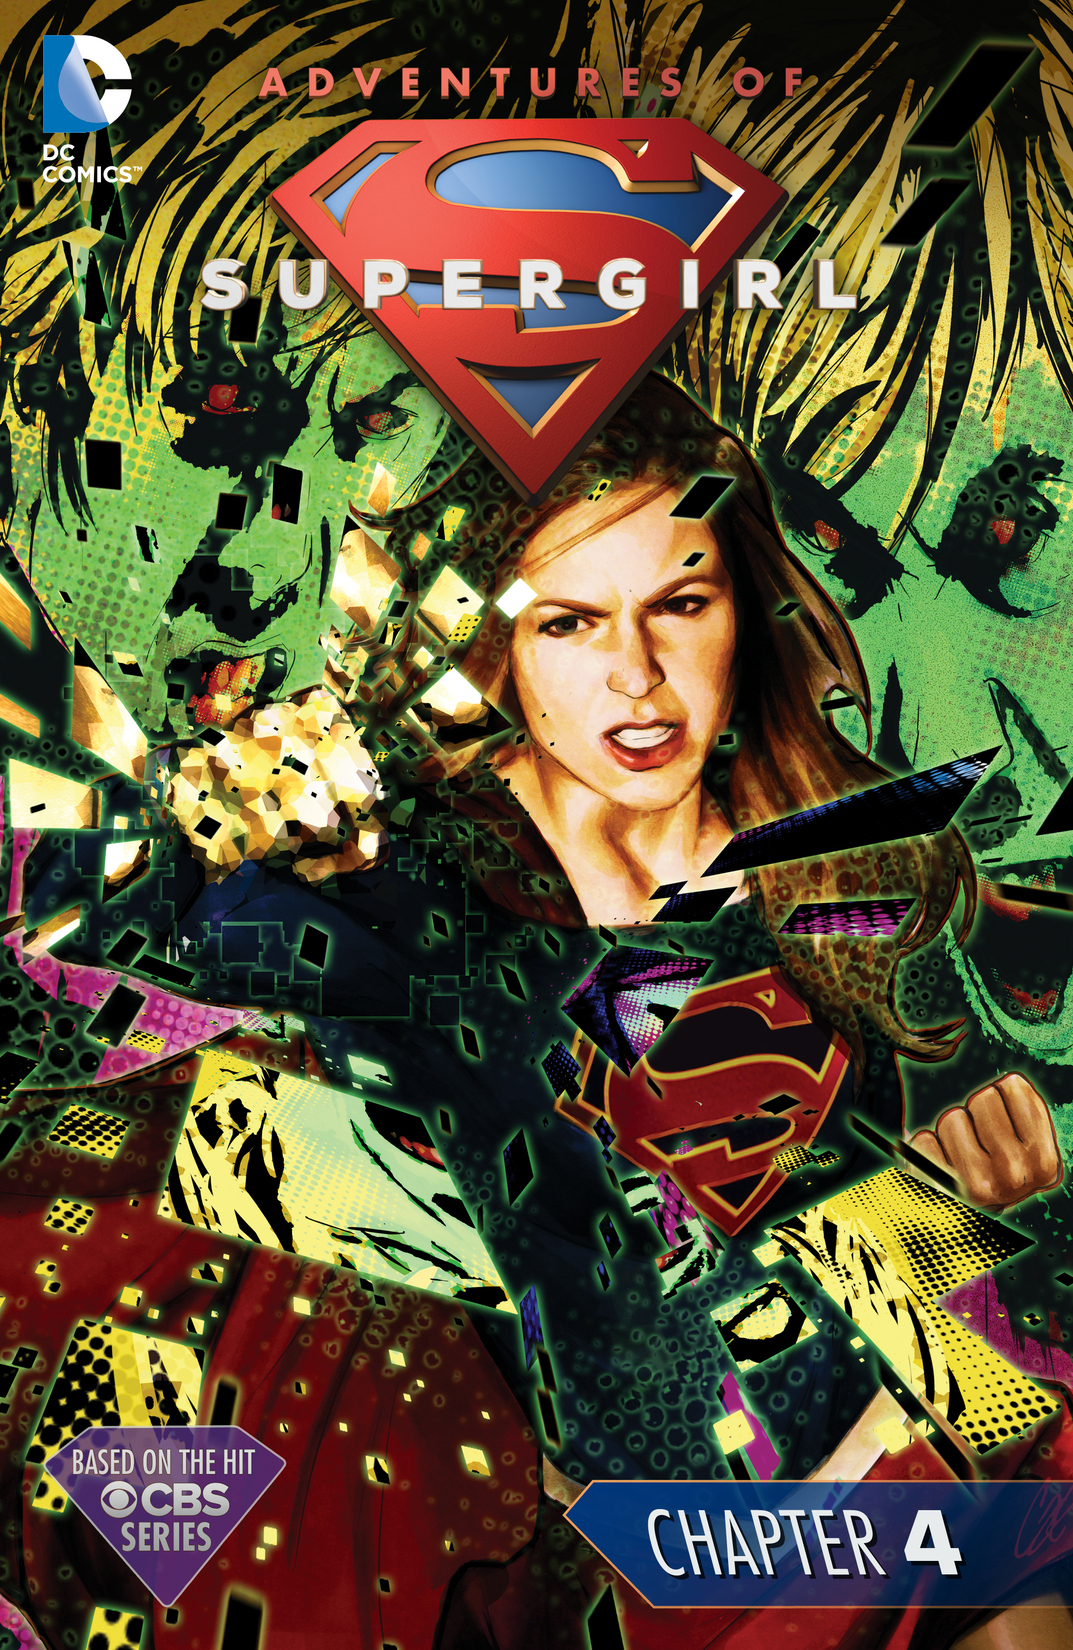 The Adventures of Supergirl #4 preview images